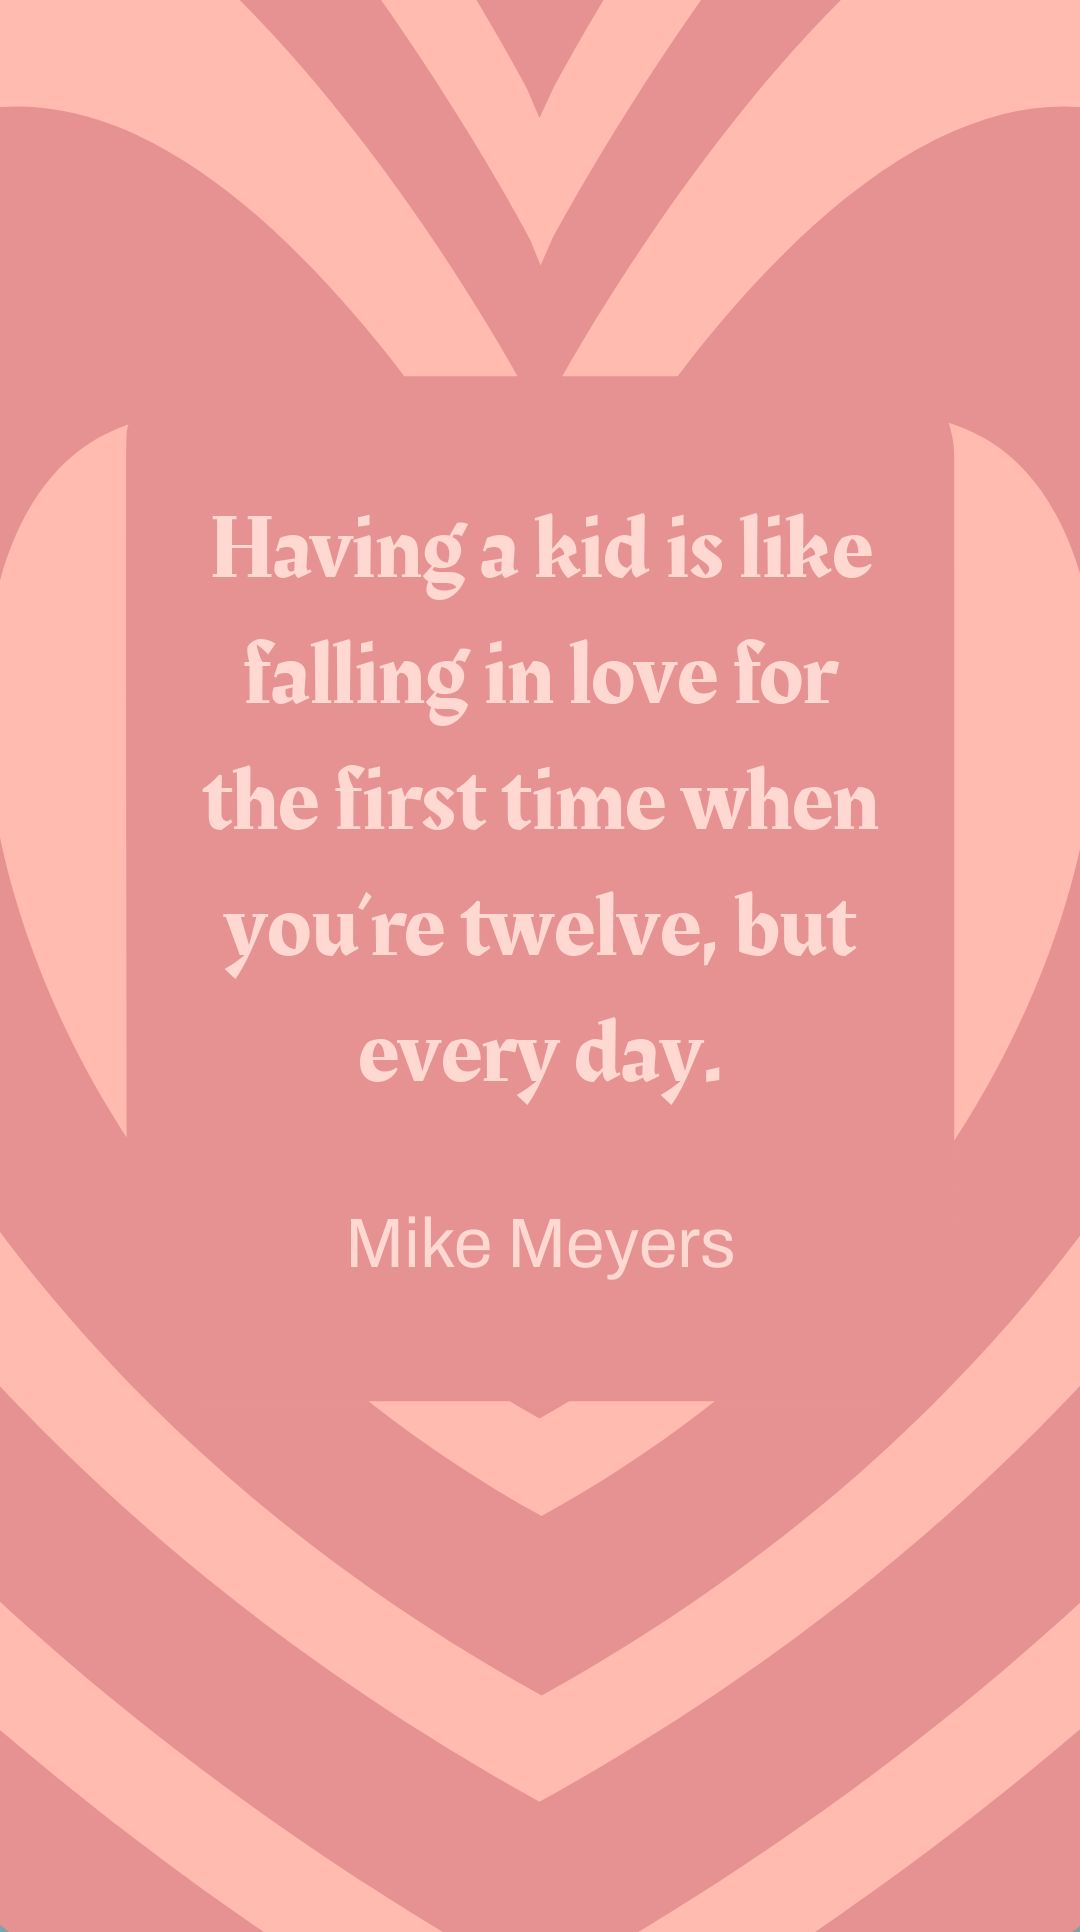 Mike Meyers -  Having a kid is like falling in love for the first time when you’re twelve, but every day. 